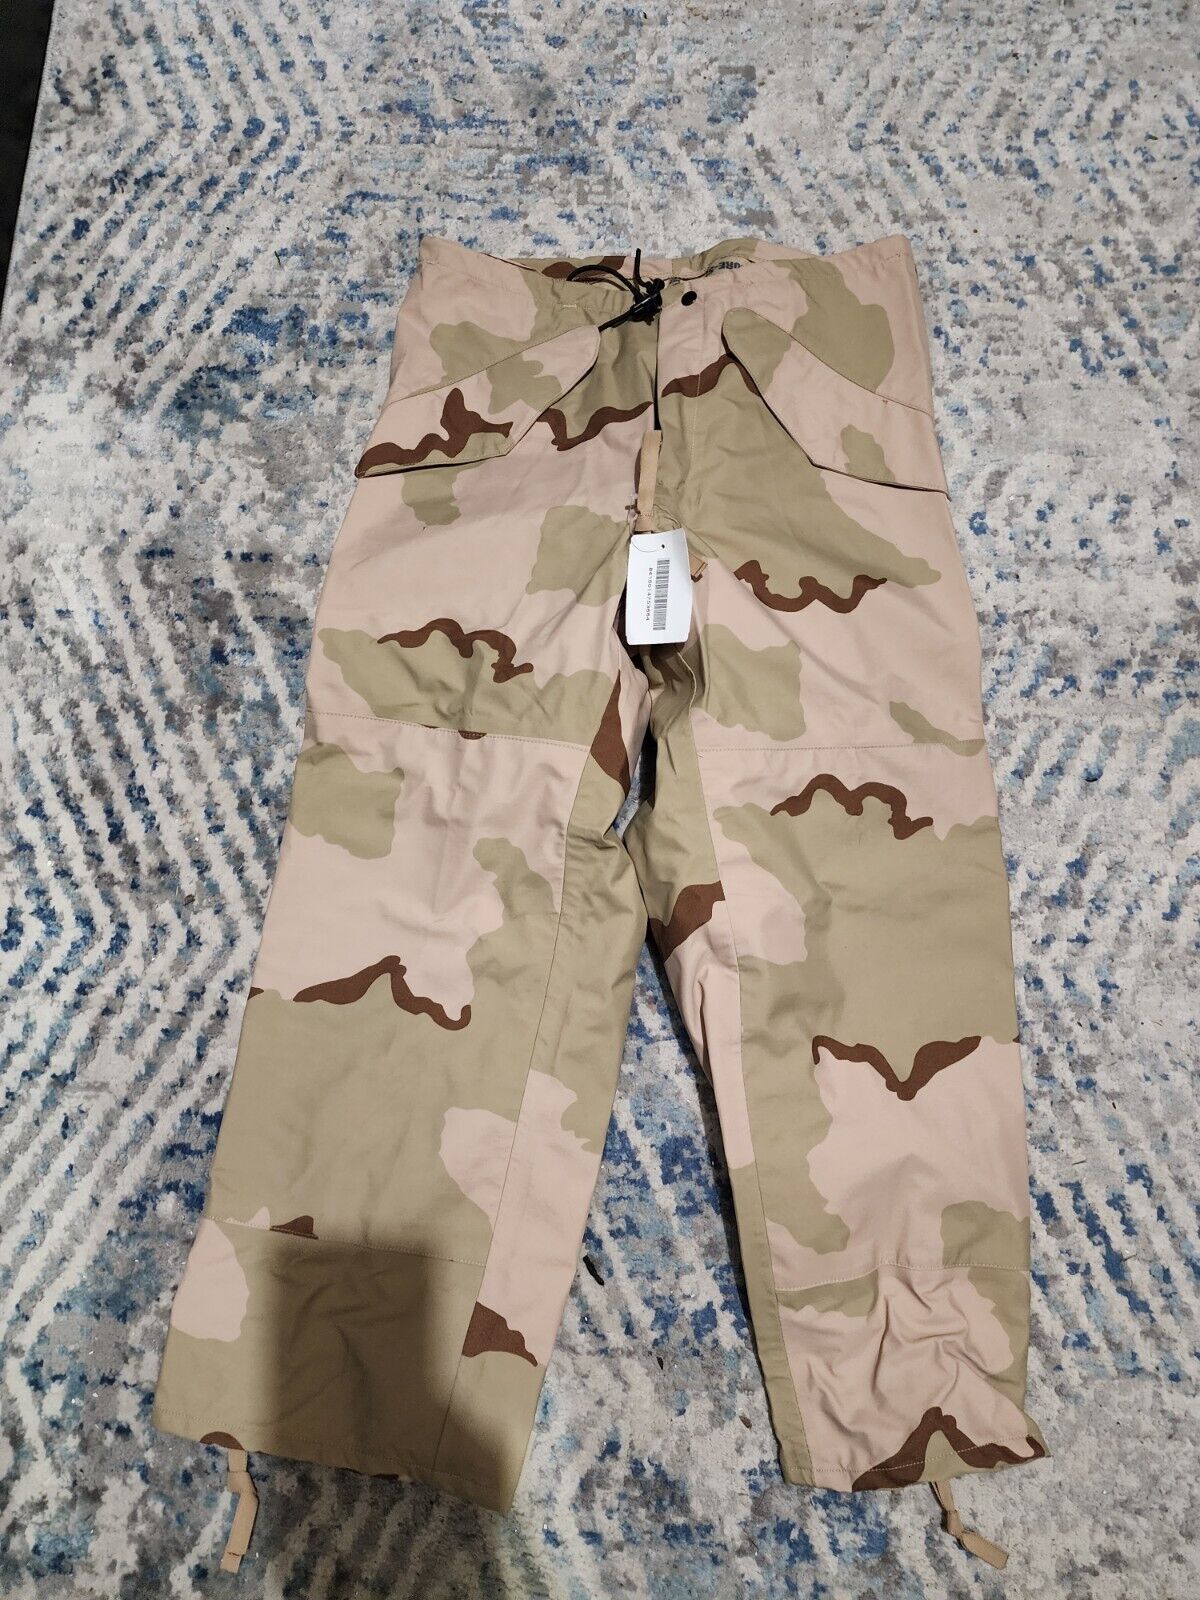 Desert Camouflage Goretex Extended Cold Weather Trousers Sz. Sm X-short